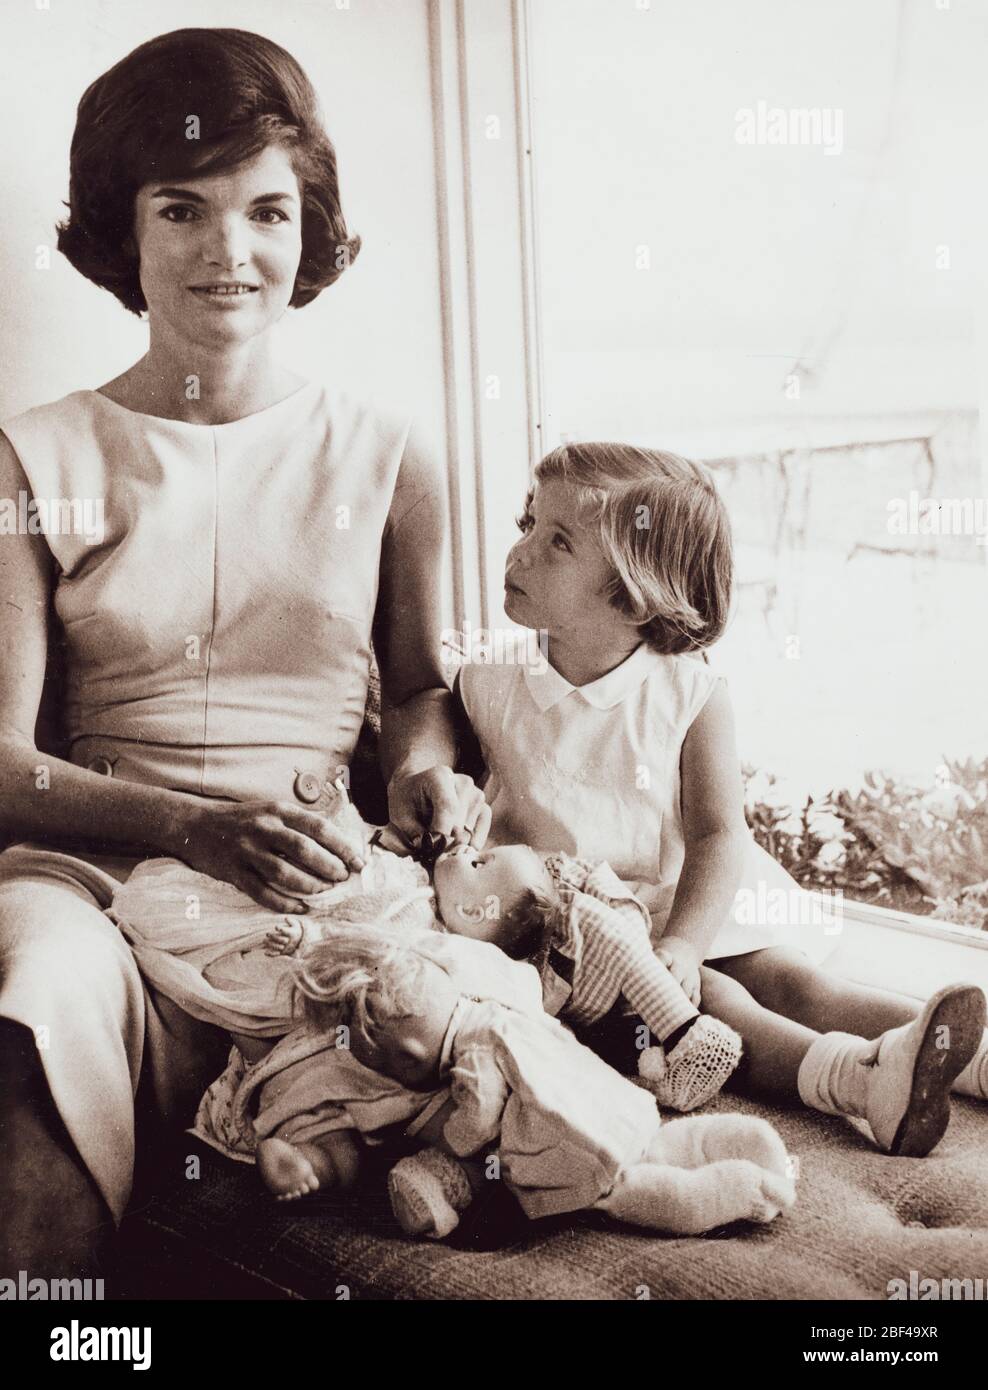 First Lady of the United States JACQUELINE KENNEDY daughter CAROLINE ...